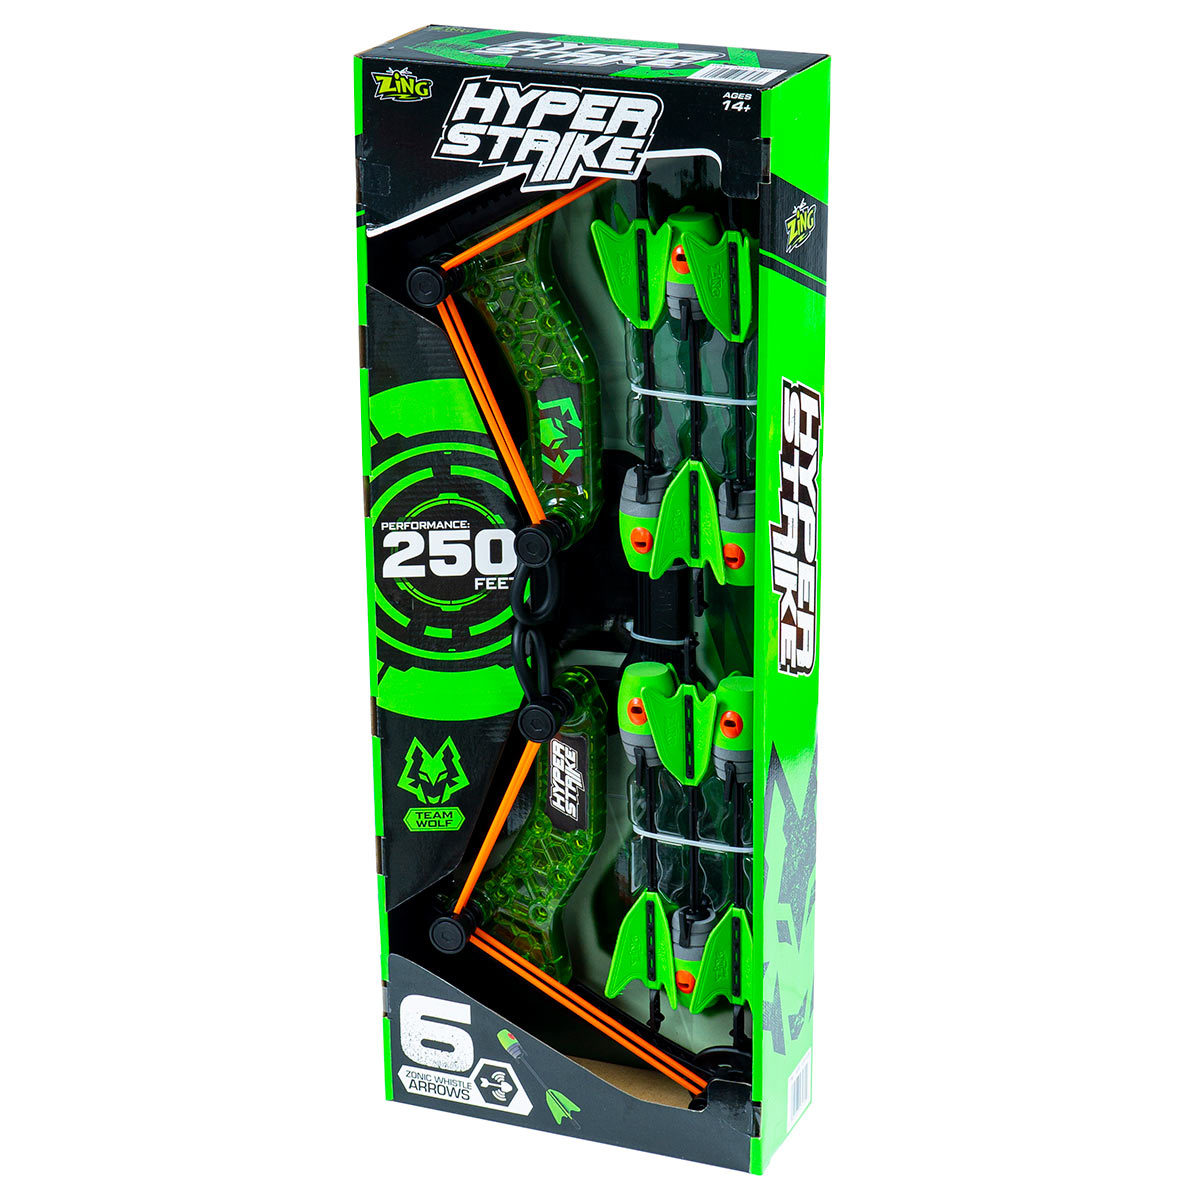 Zing hyperstrike bow packaged